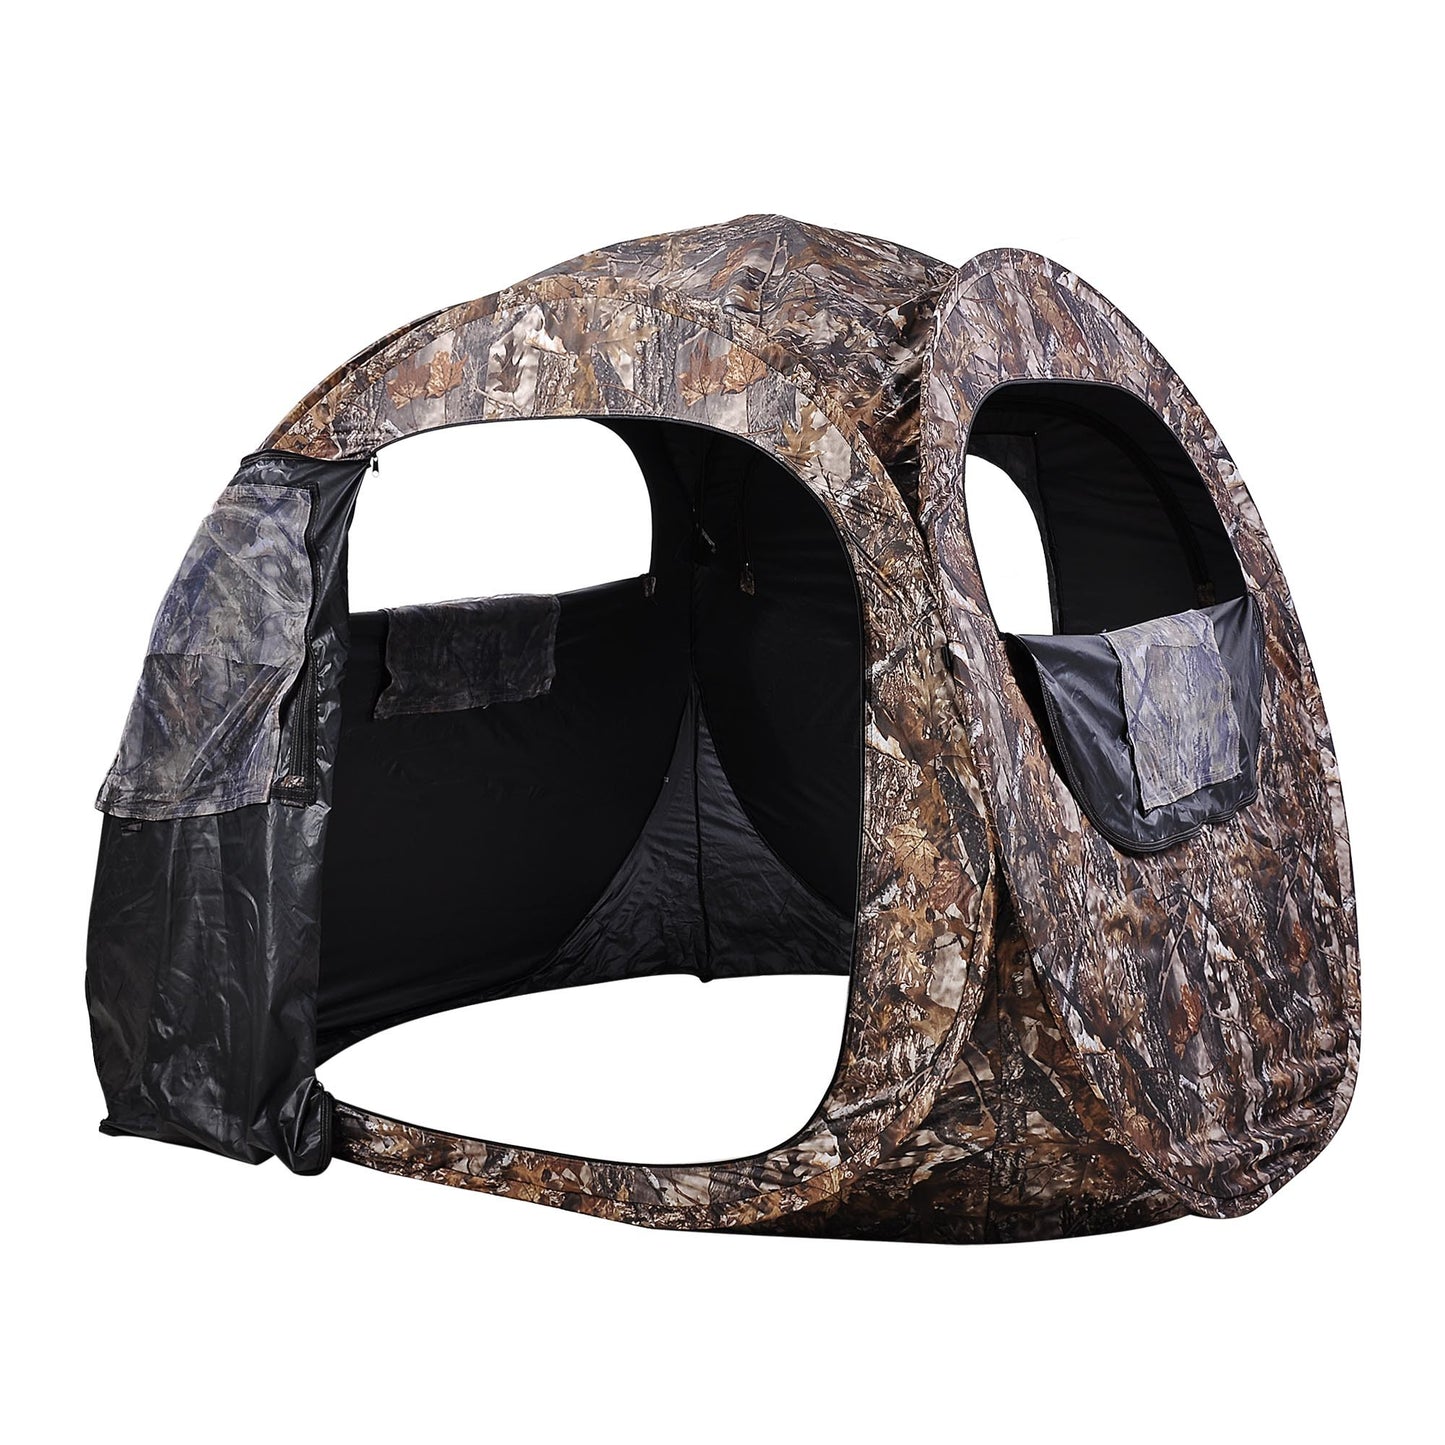 Portable & Collapsible Two-Person Hunting Blind Tent